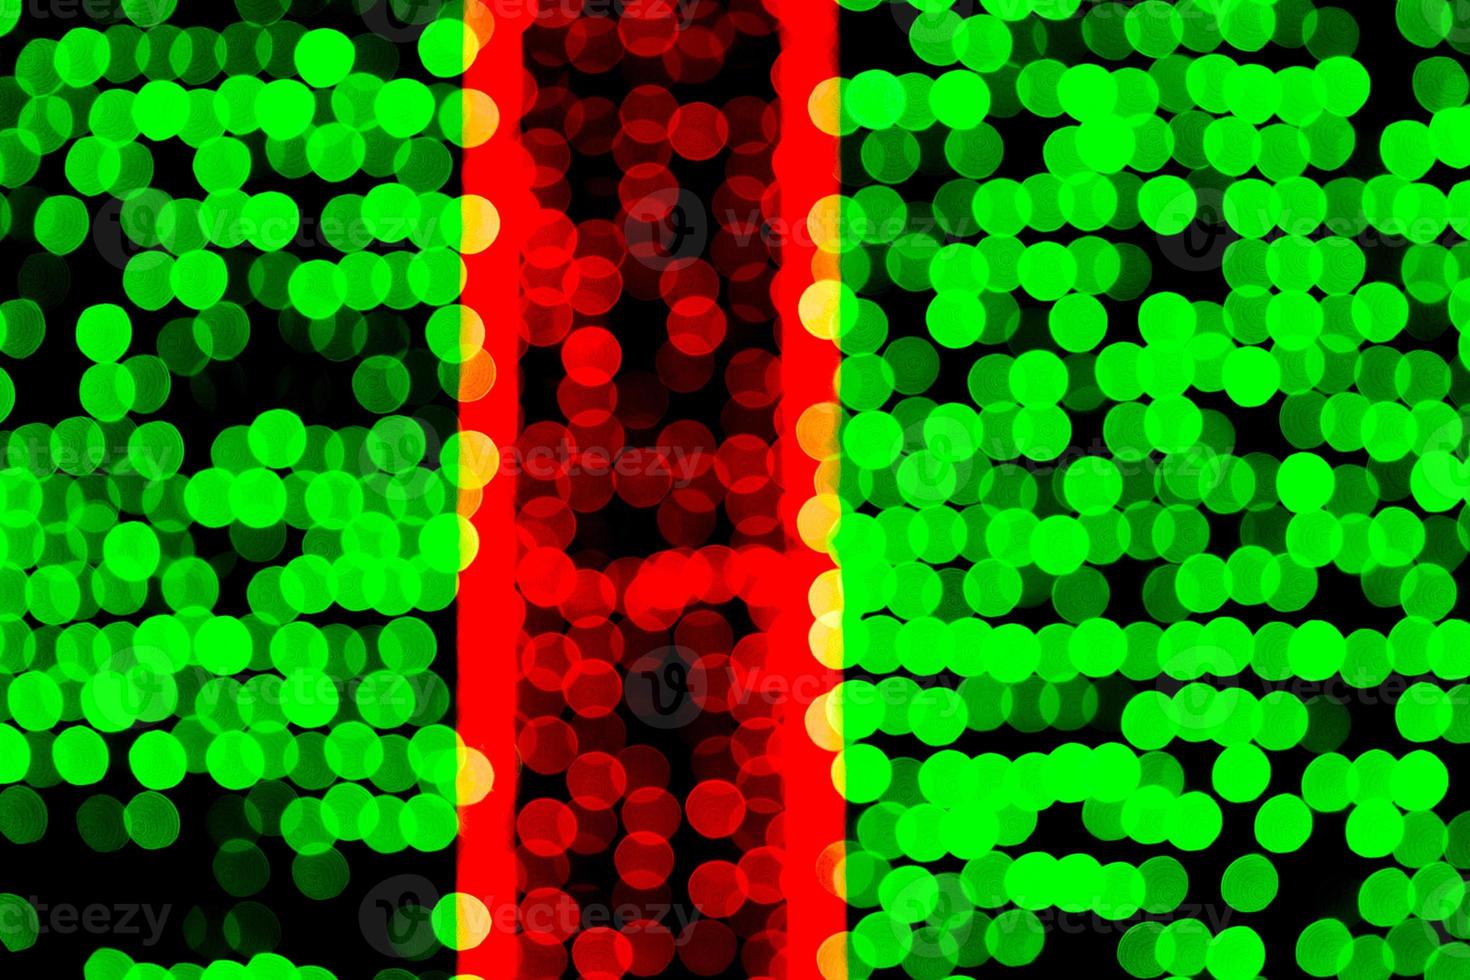 Unfocused abstract green and red bokeh on black background. defocused and blurred many round light photo